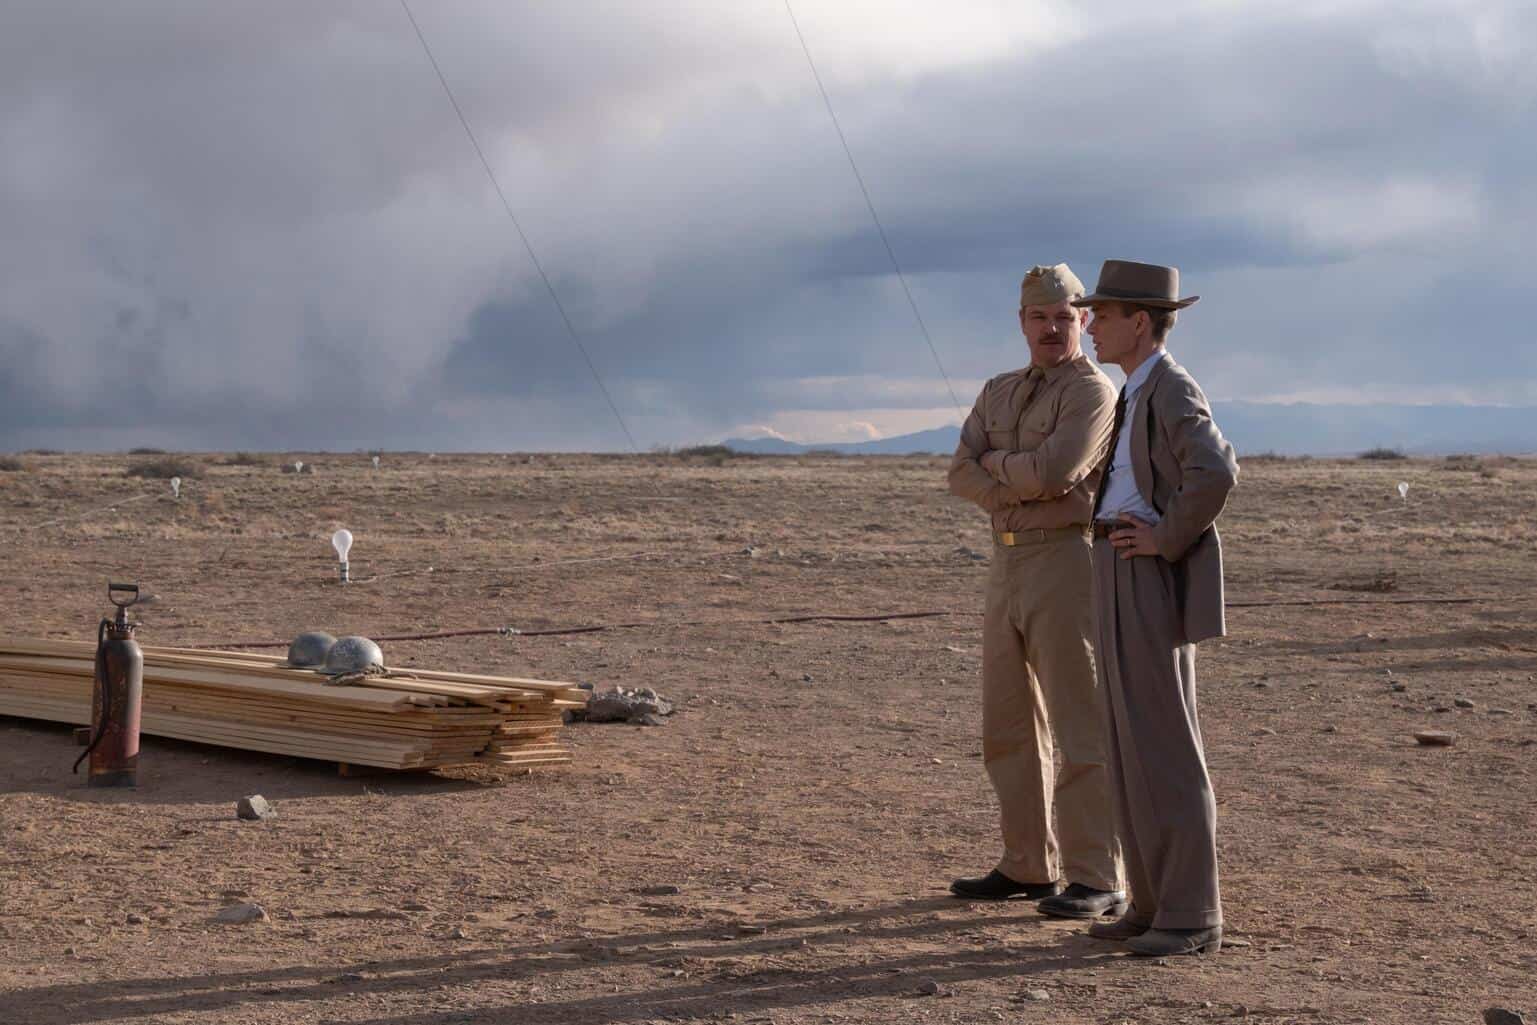 Two military men stand near a desert building site in this image from Universal Pictures.